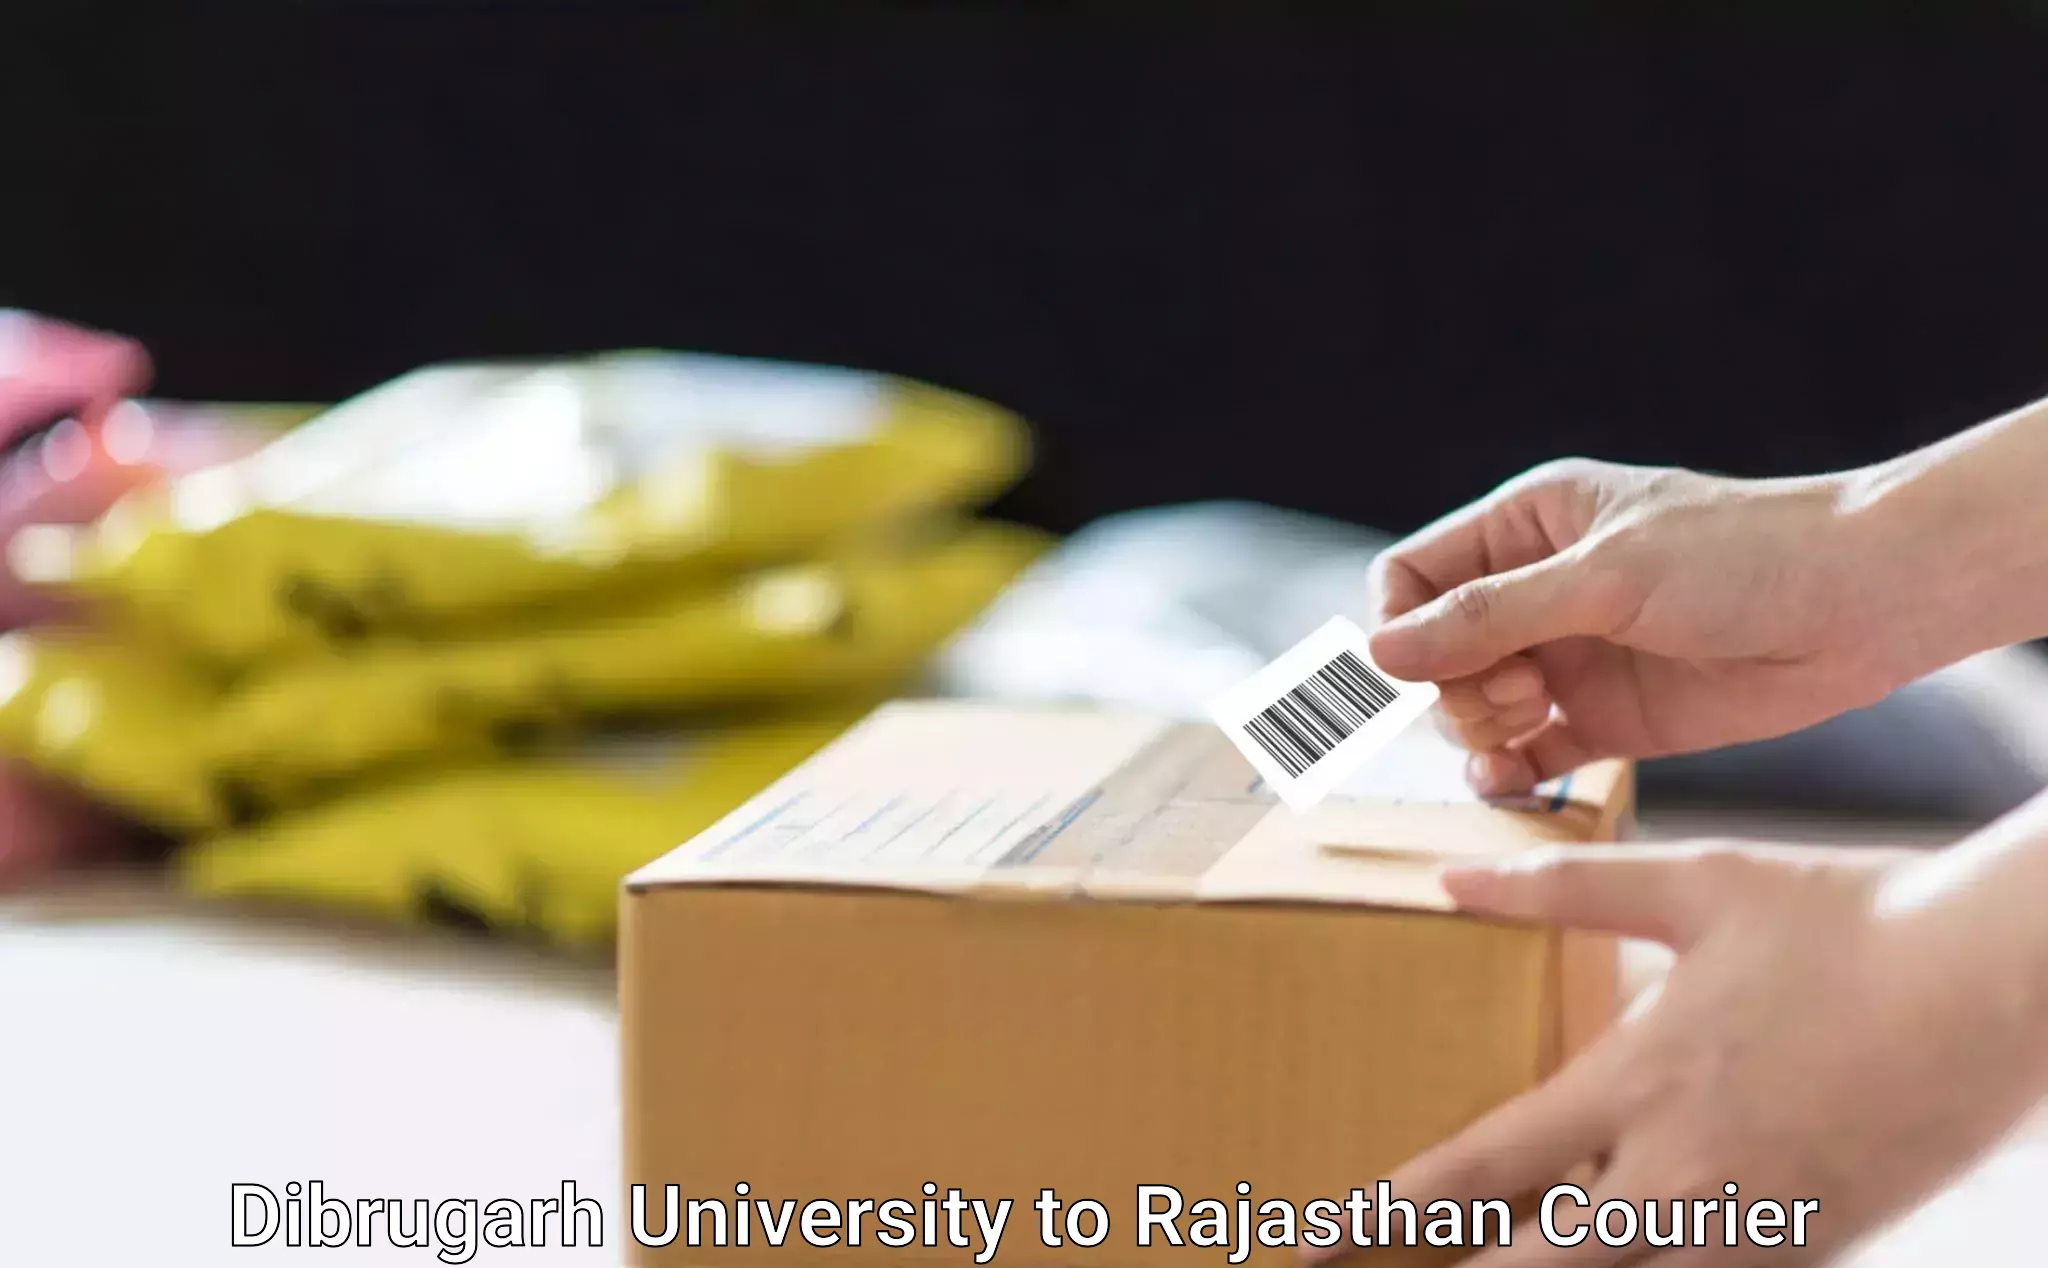 Nationwide delivery network Dibrugarh University to Rajasthan